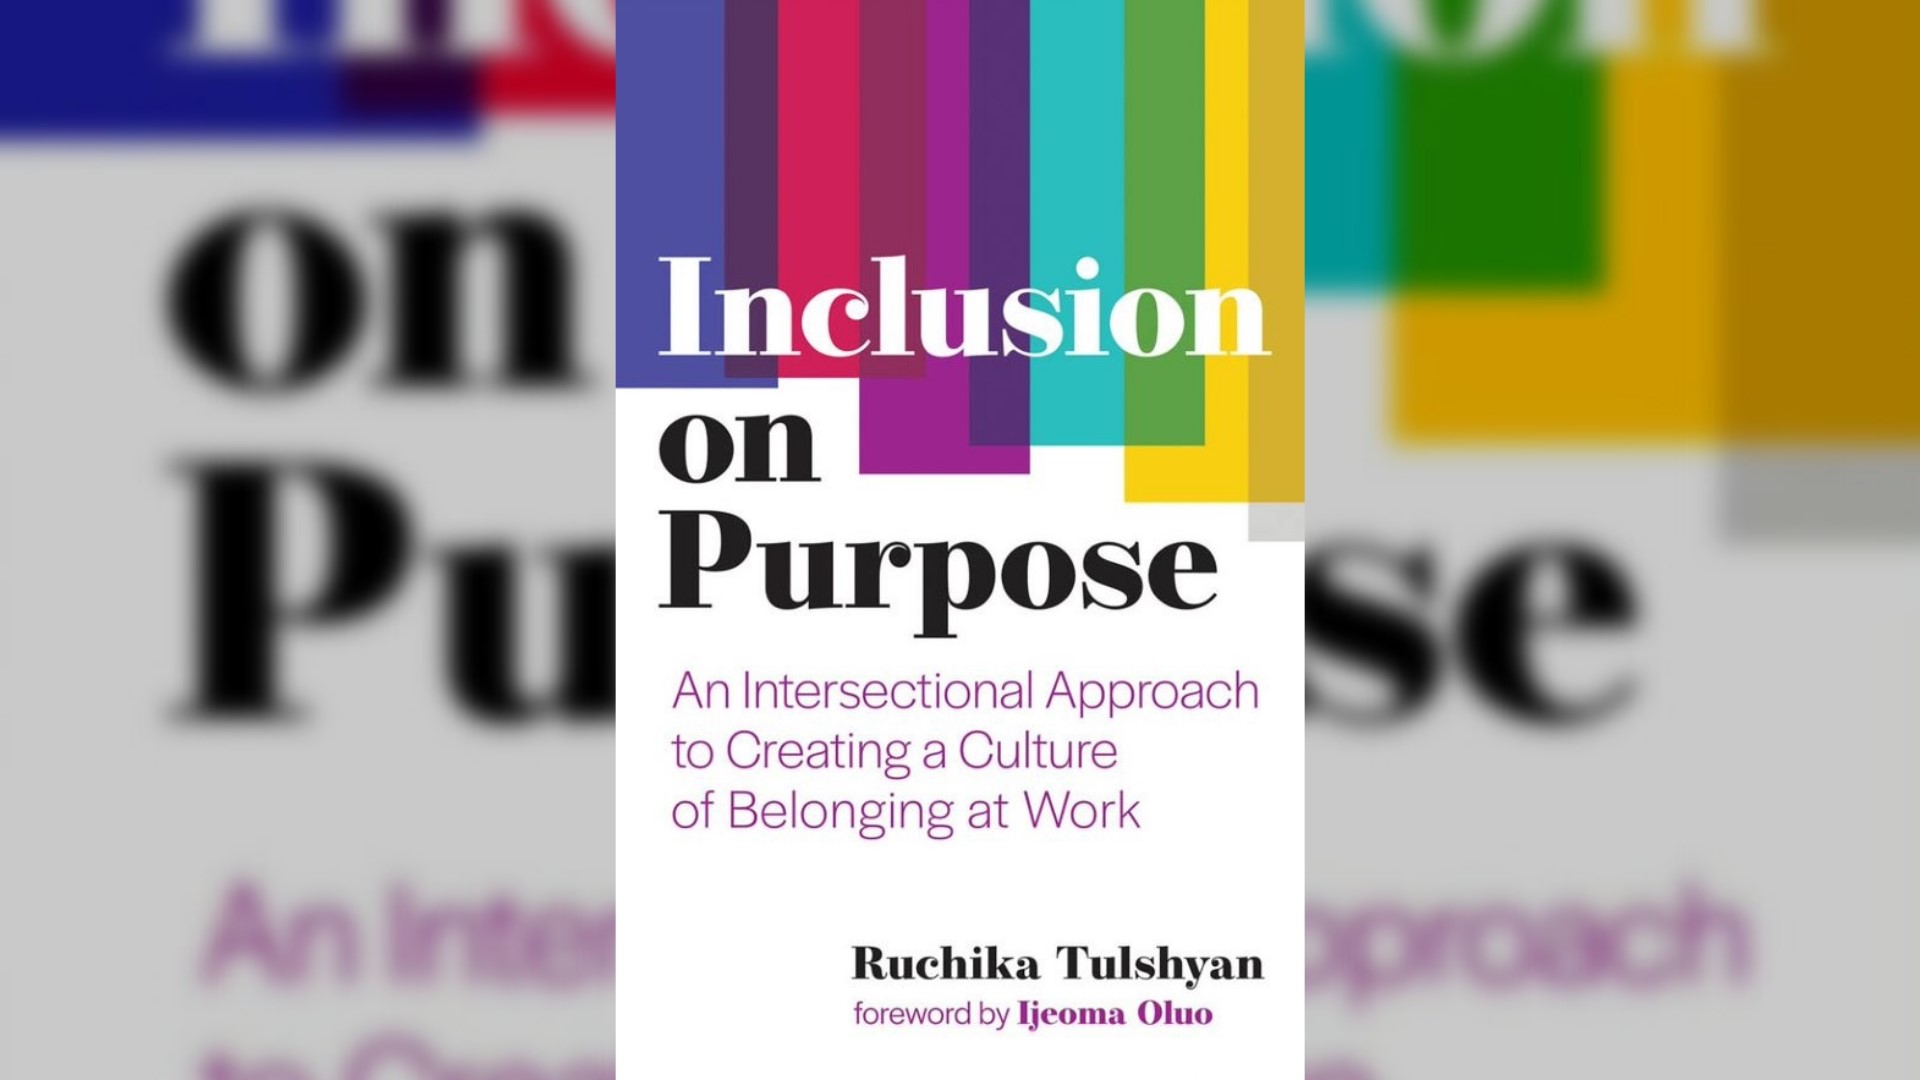 The "Inclusion on Purpose" author talks to New Day about how can we make progress towards inclusion and diversity at work, and why we must start now.